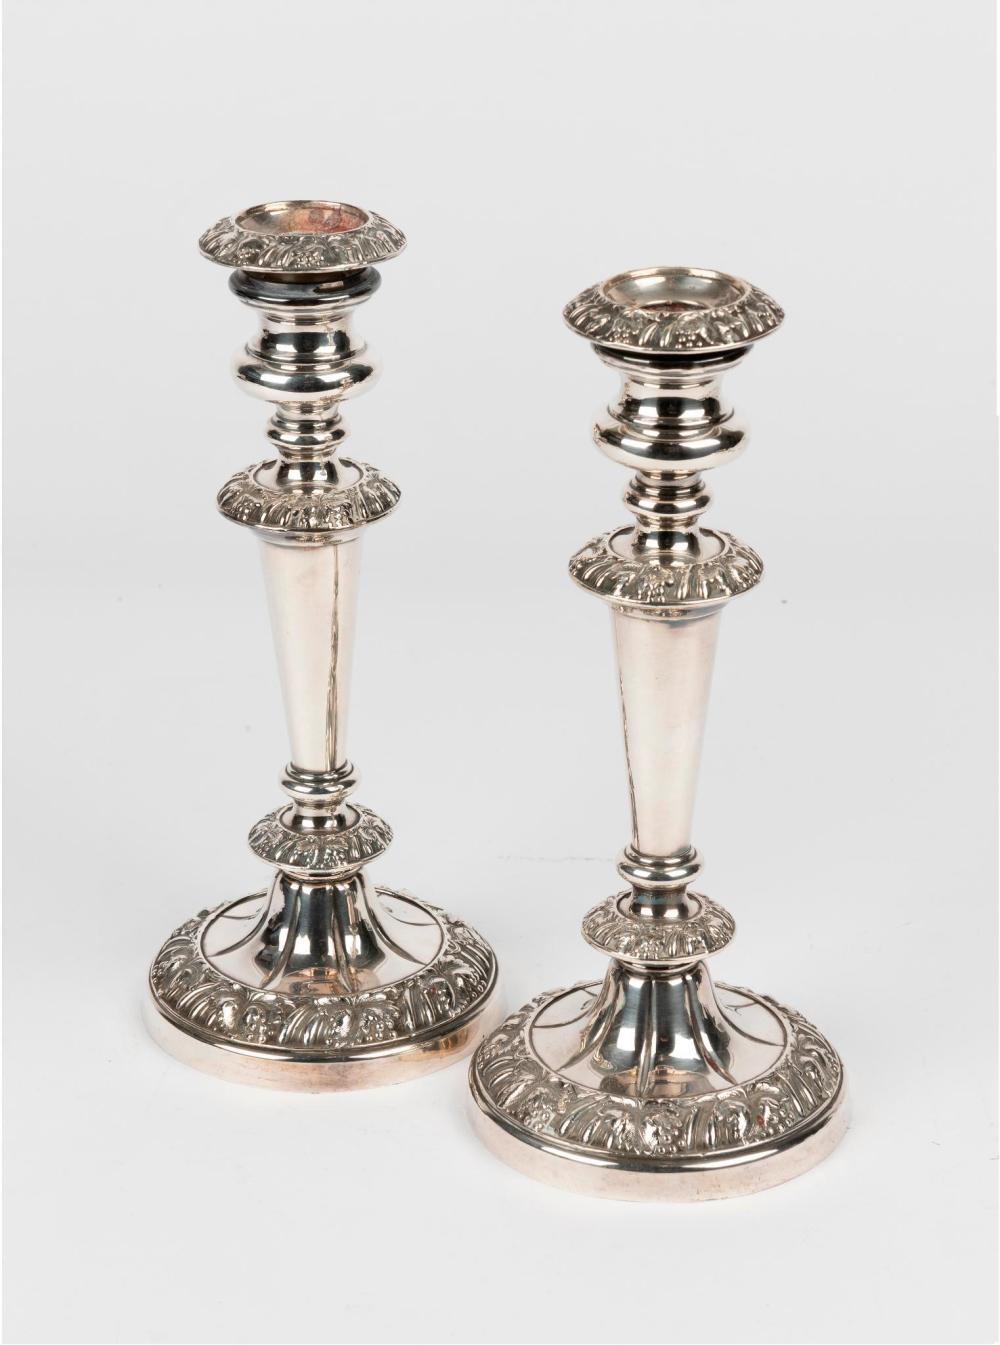 A Pair Of Silver Plate Candlesticks, 19th Century